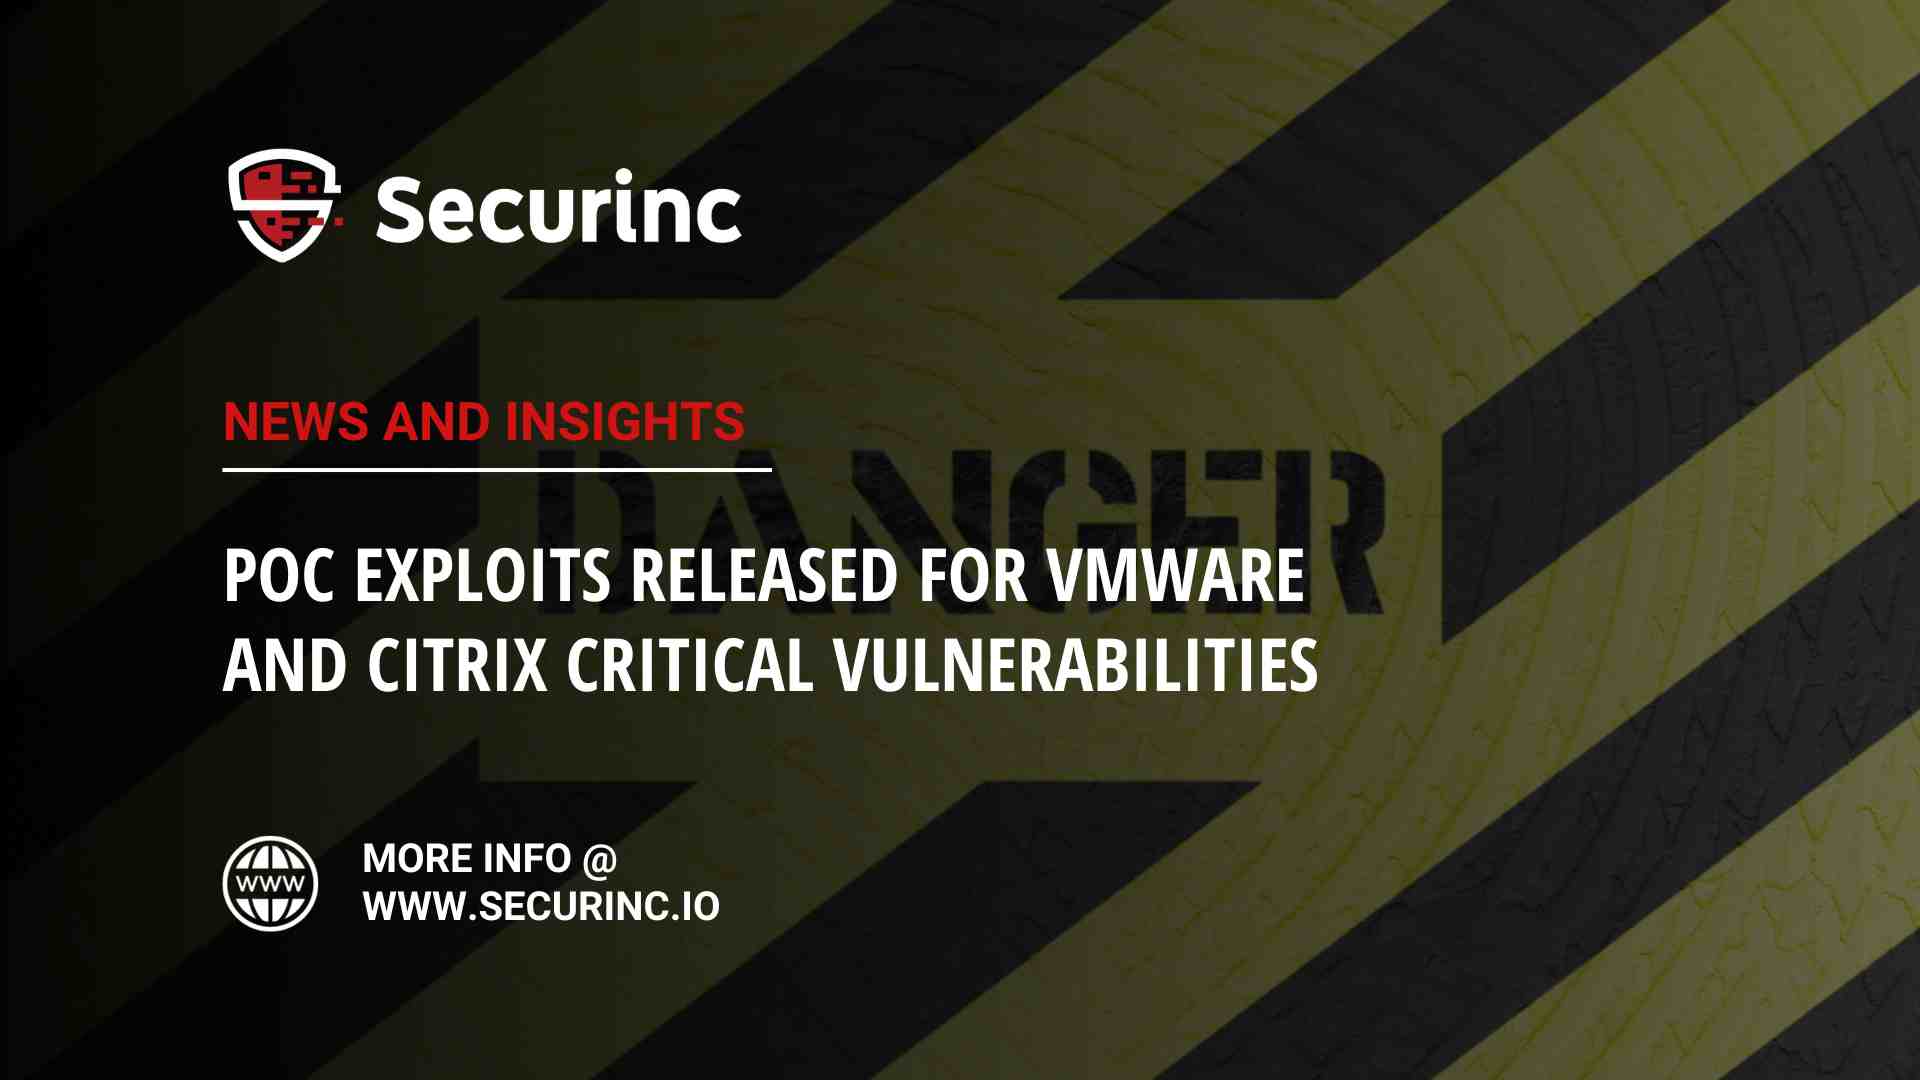 PoC Exploits Released for VMWare and Citrix Critical Vulnerabilities